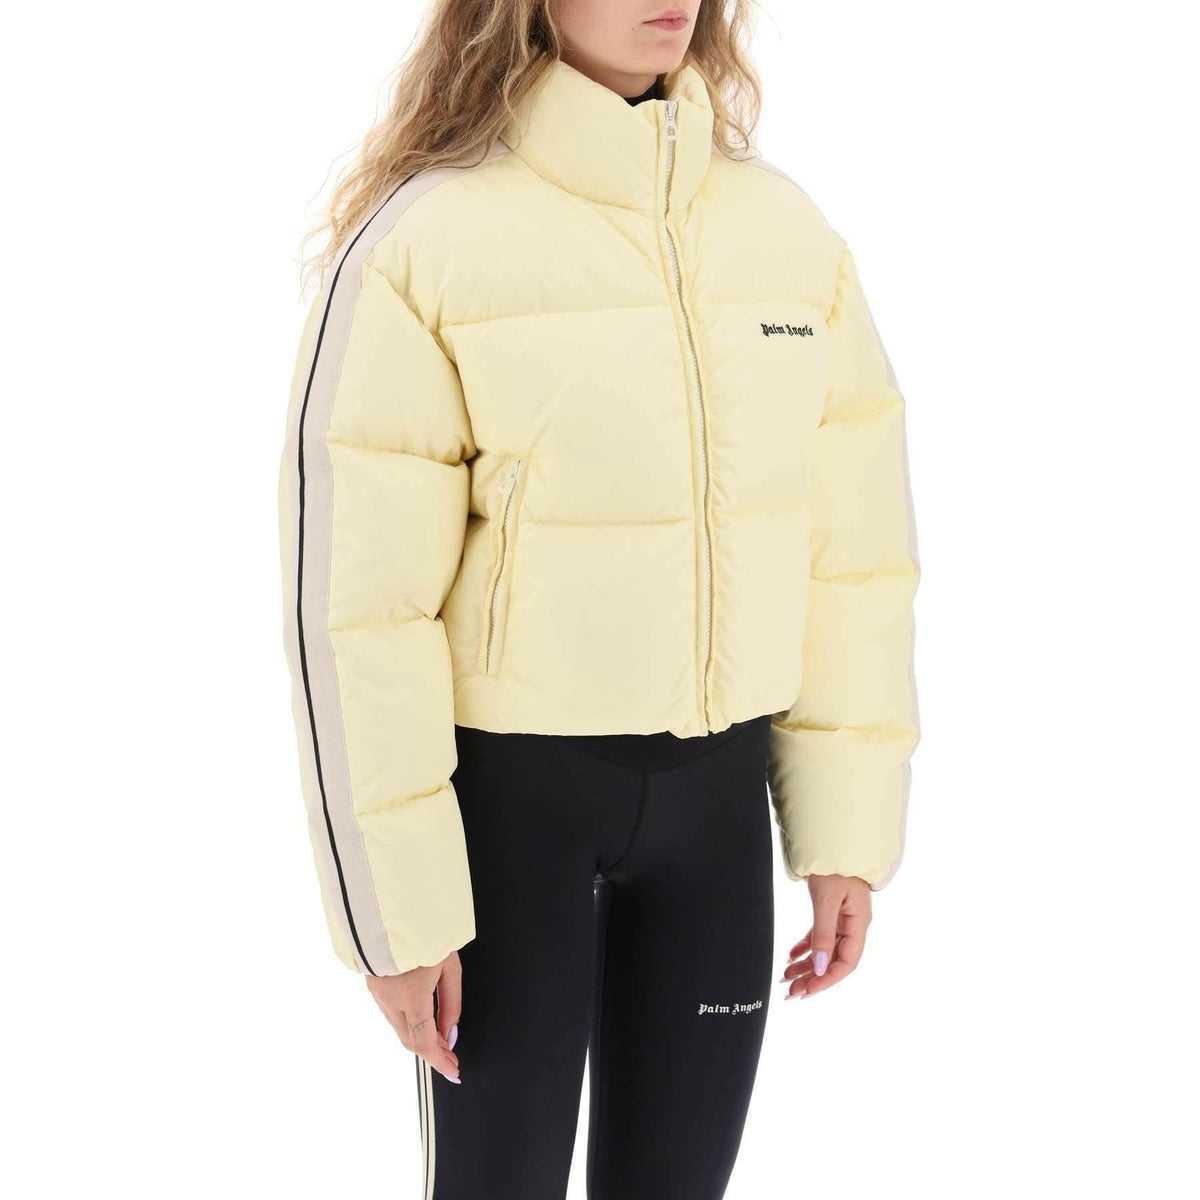 Palm Angels Cropped Puffer Jacket With Bands On Sleeves - JOHN JULIA